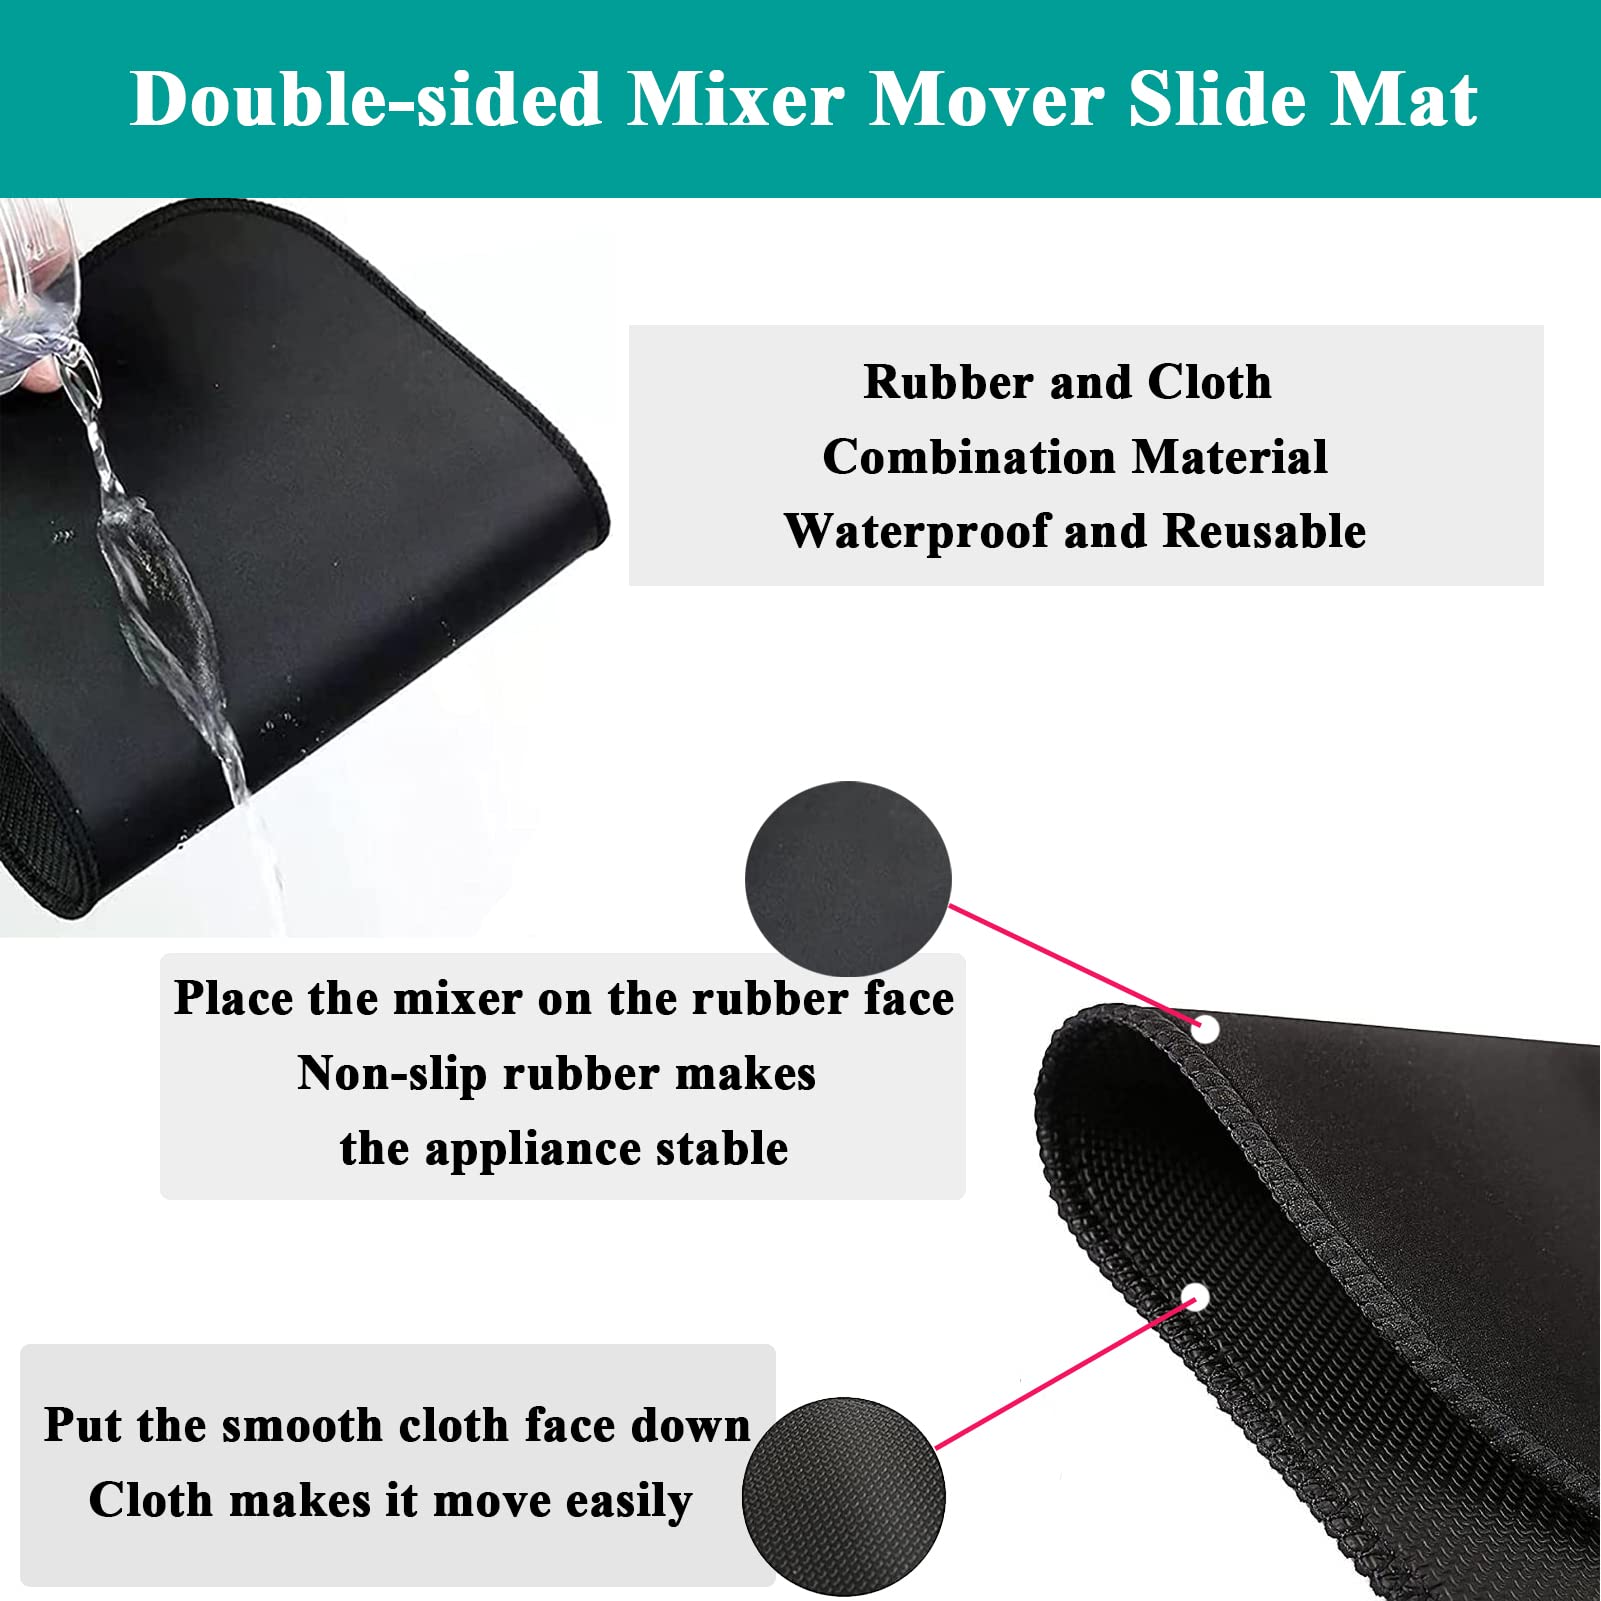 Mixer Slider Mat with 2 Cord Organizers for Stand Mixer, Kitchen Aid Mixers Accessories and Attachments, Mixer Mover Sliding Mat Pad for Countertop Appliances